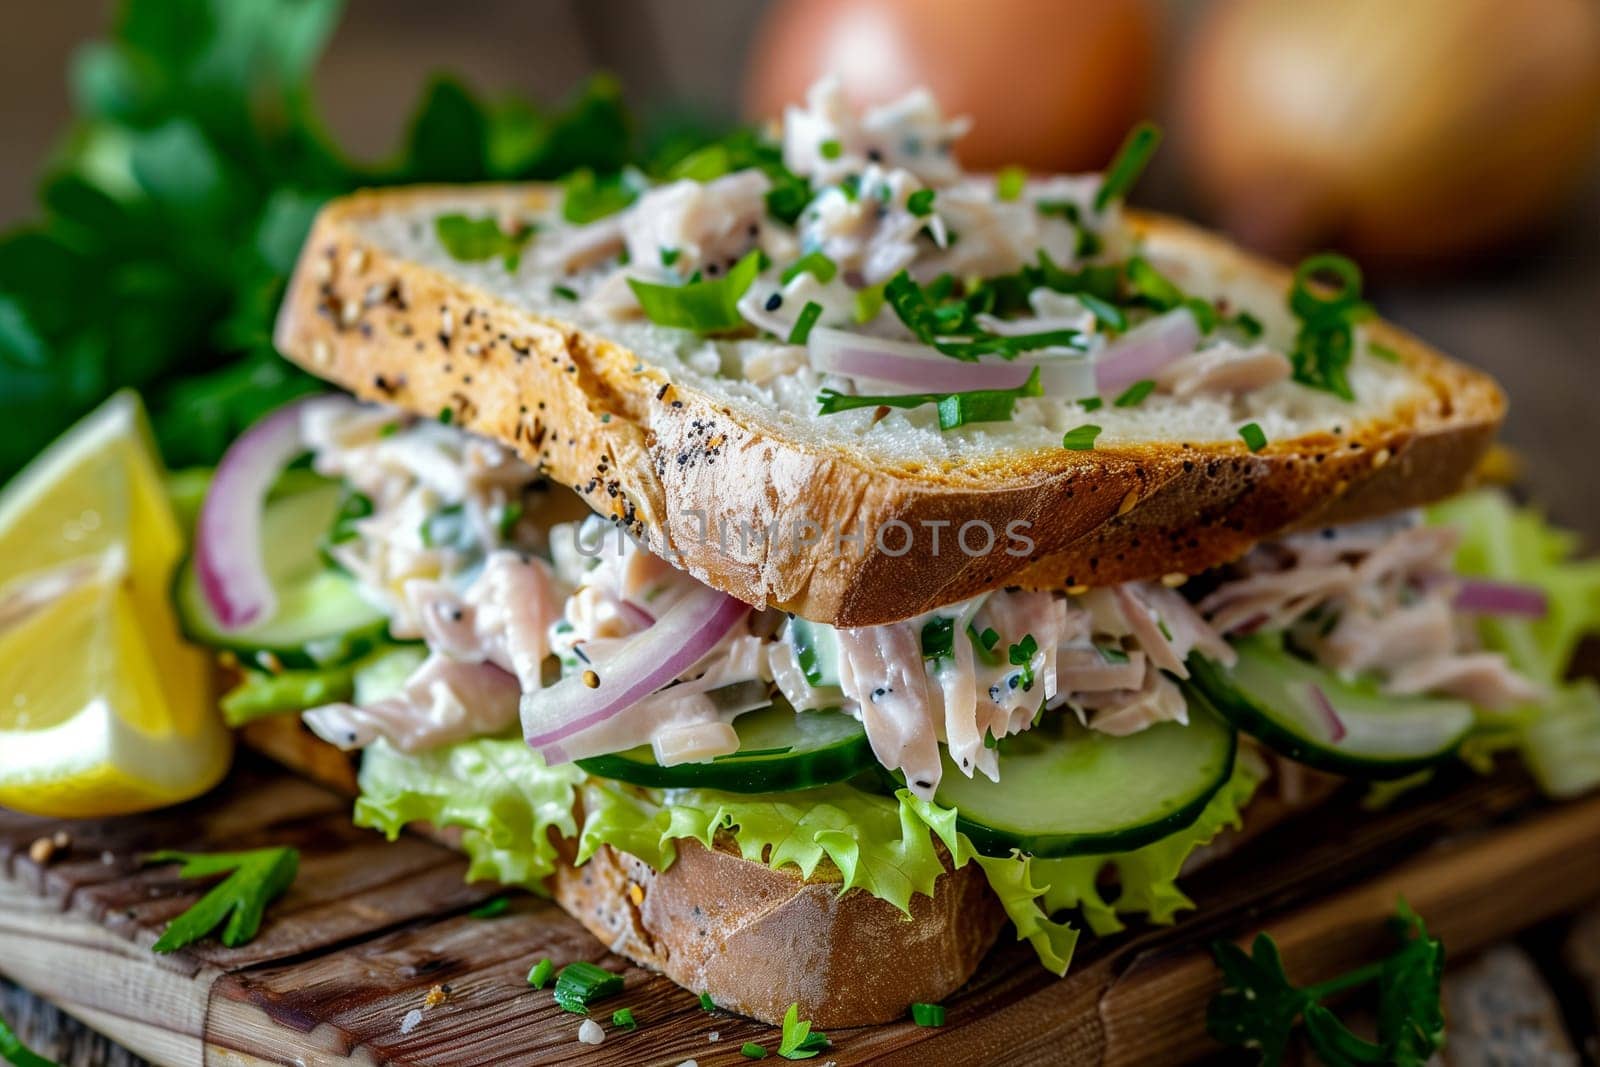 A herring sandwich placed on a wooden cutting board alongside a fresh lemon wedge, showcasing a simple and appetizing meal preparation.